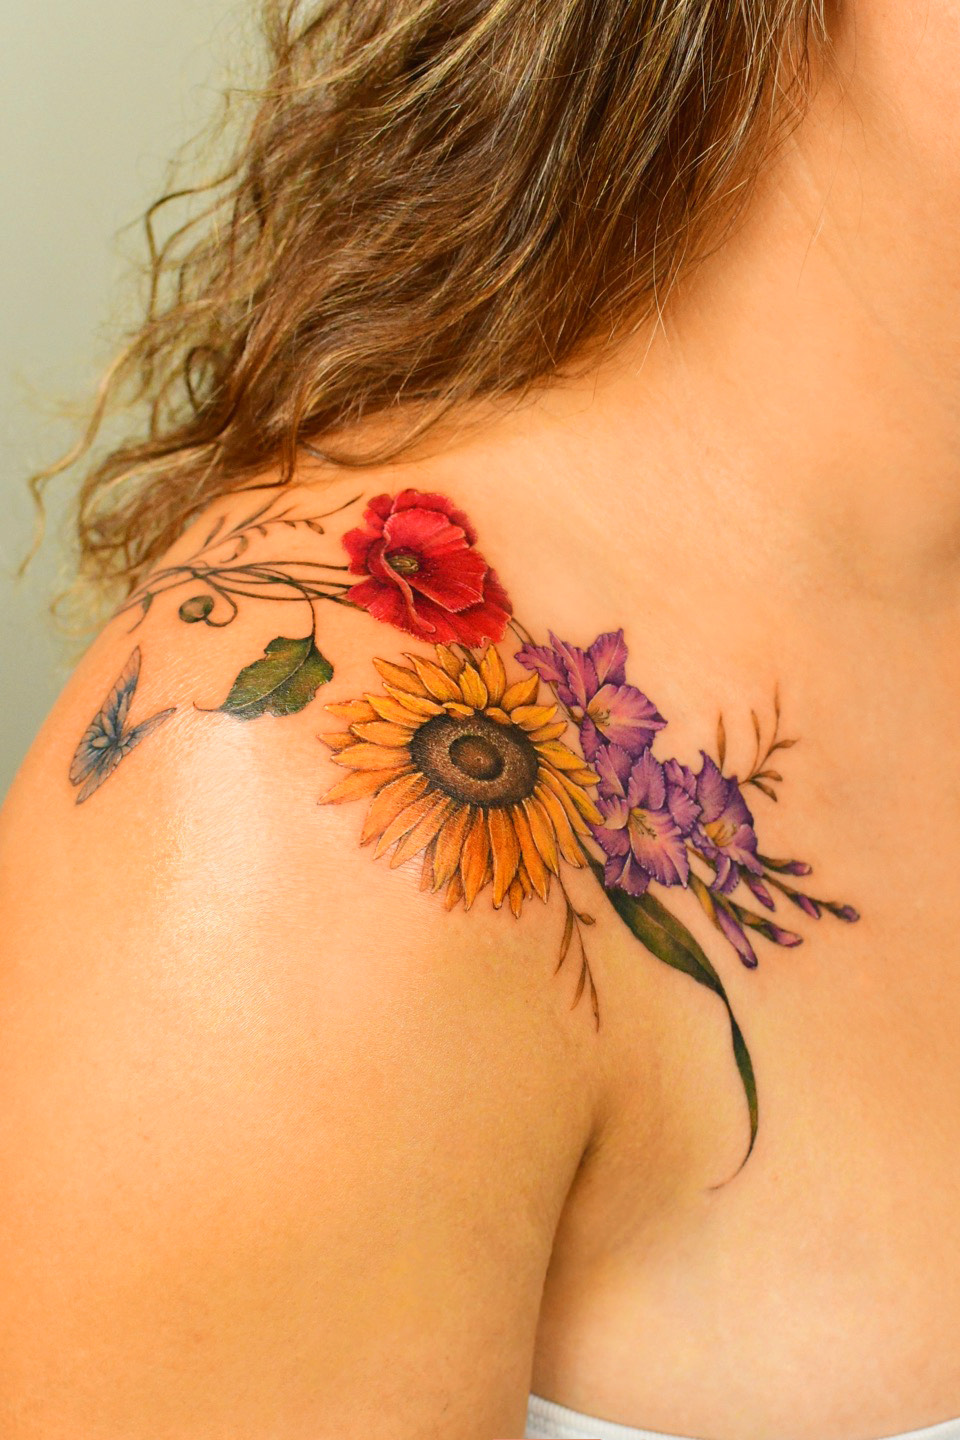 109 Flower Tattoos Designs Ideas and Meanings